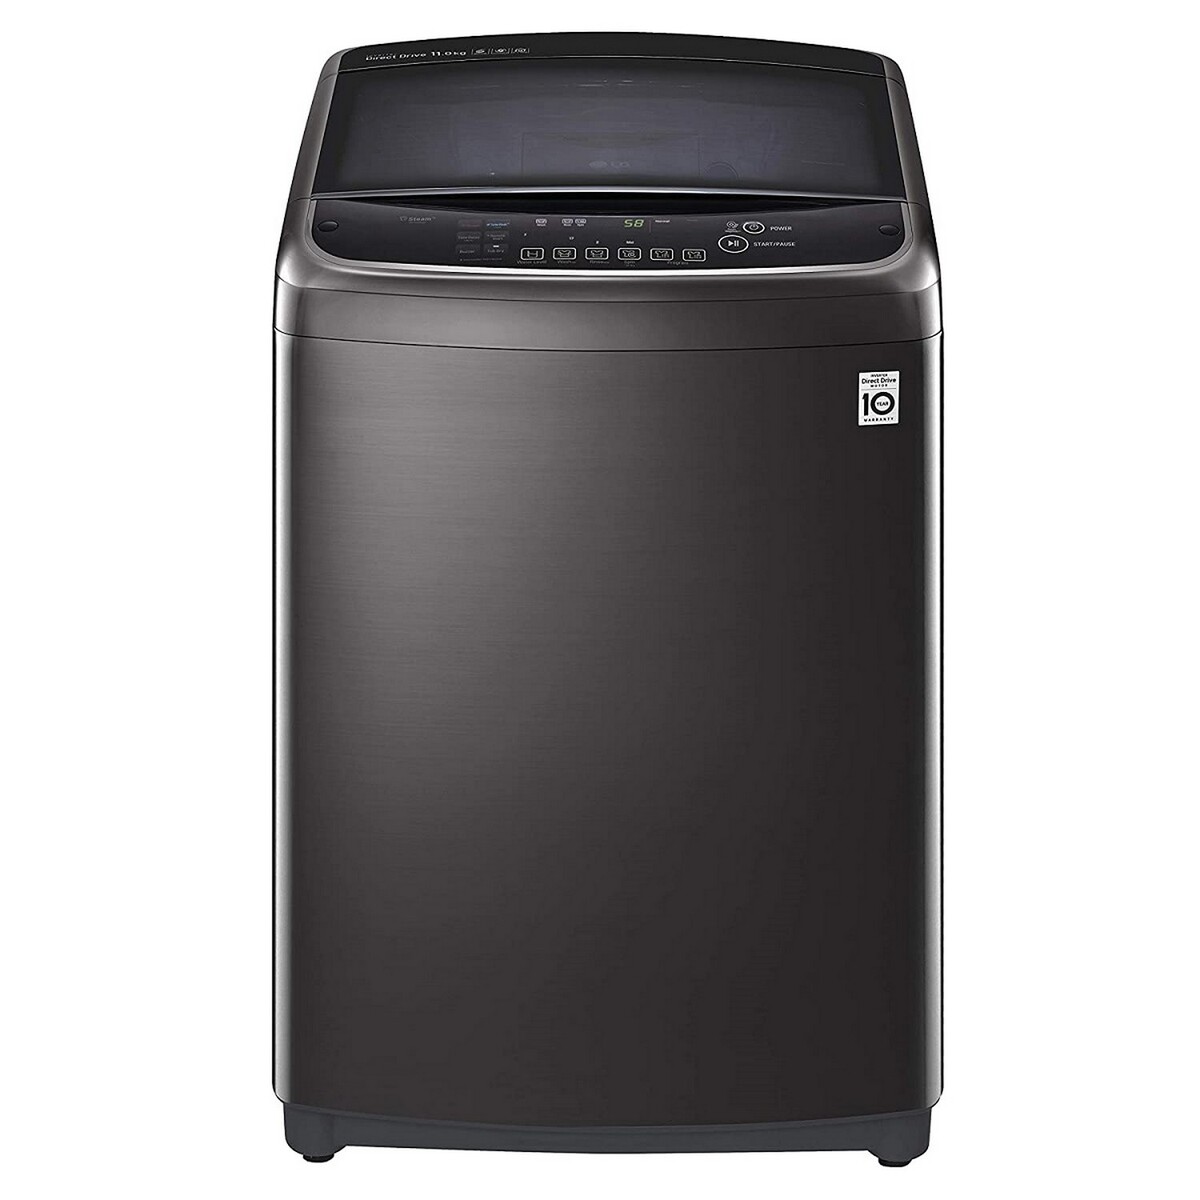 LG Fully Automatic Top Load Washing Machine THD11STB 11 Kg